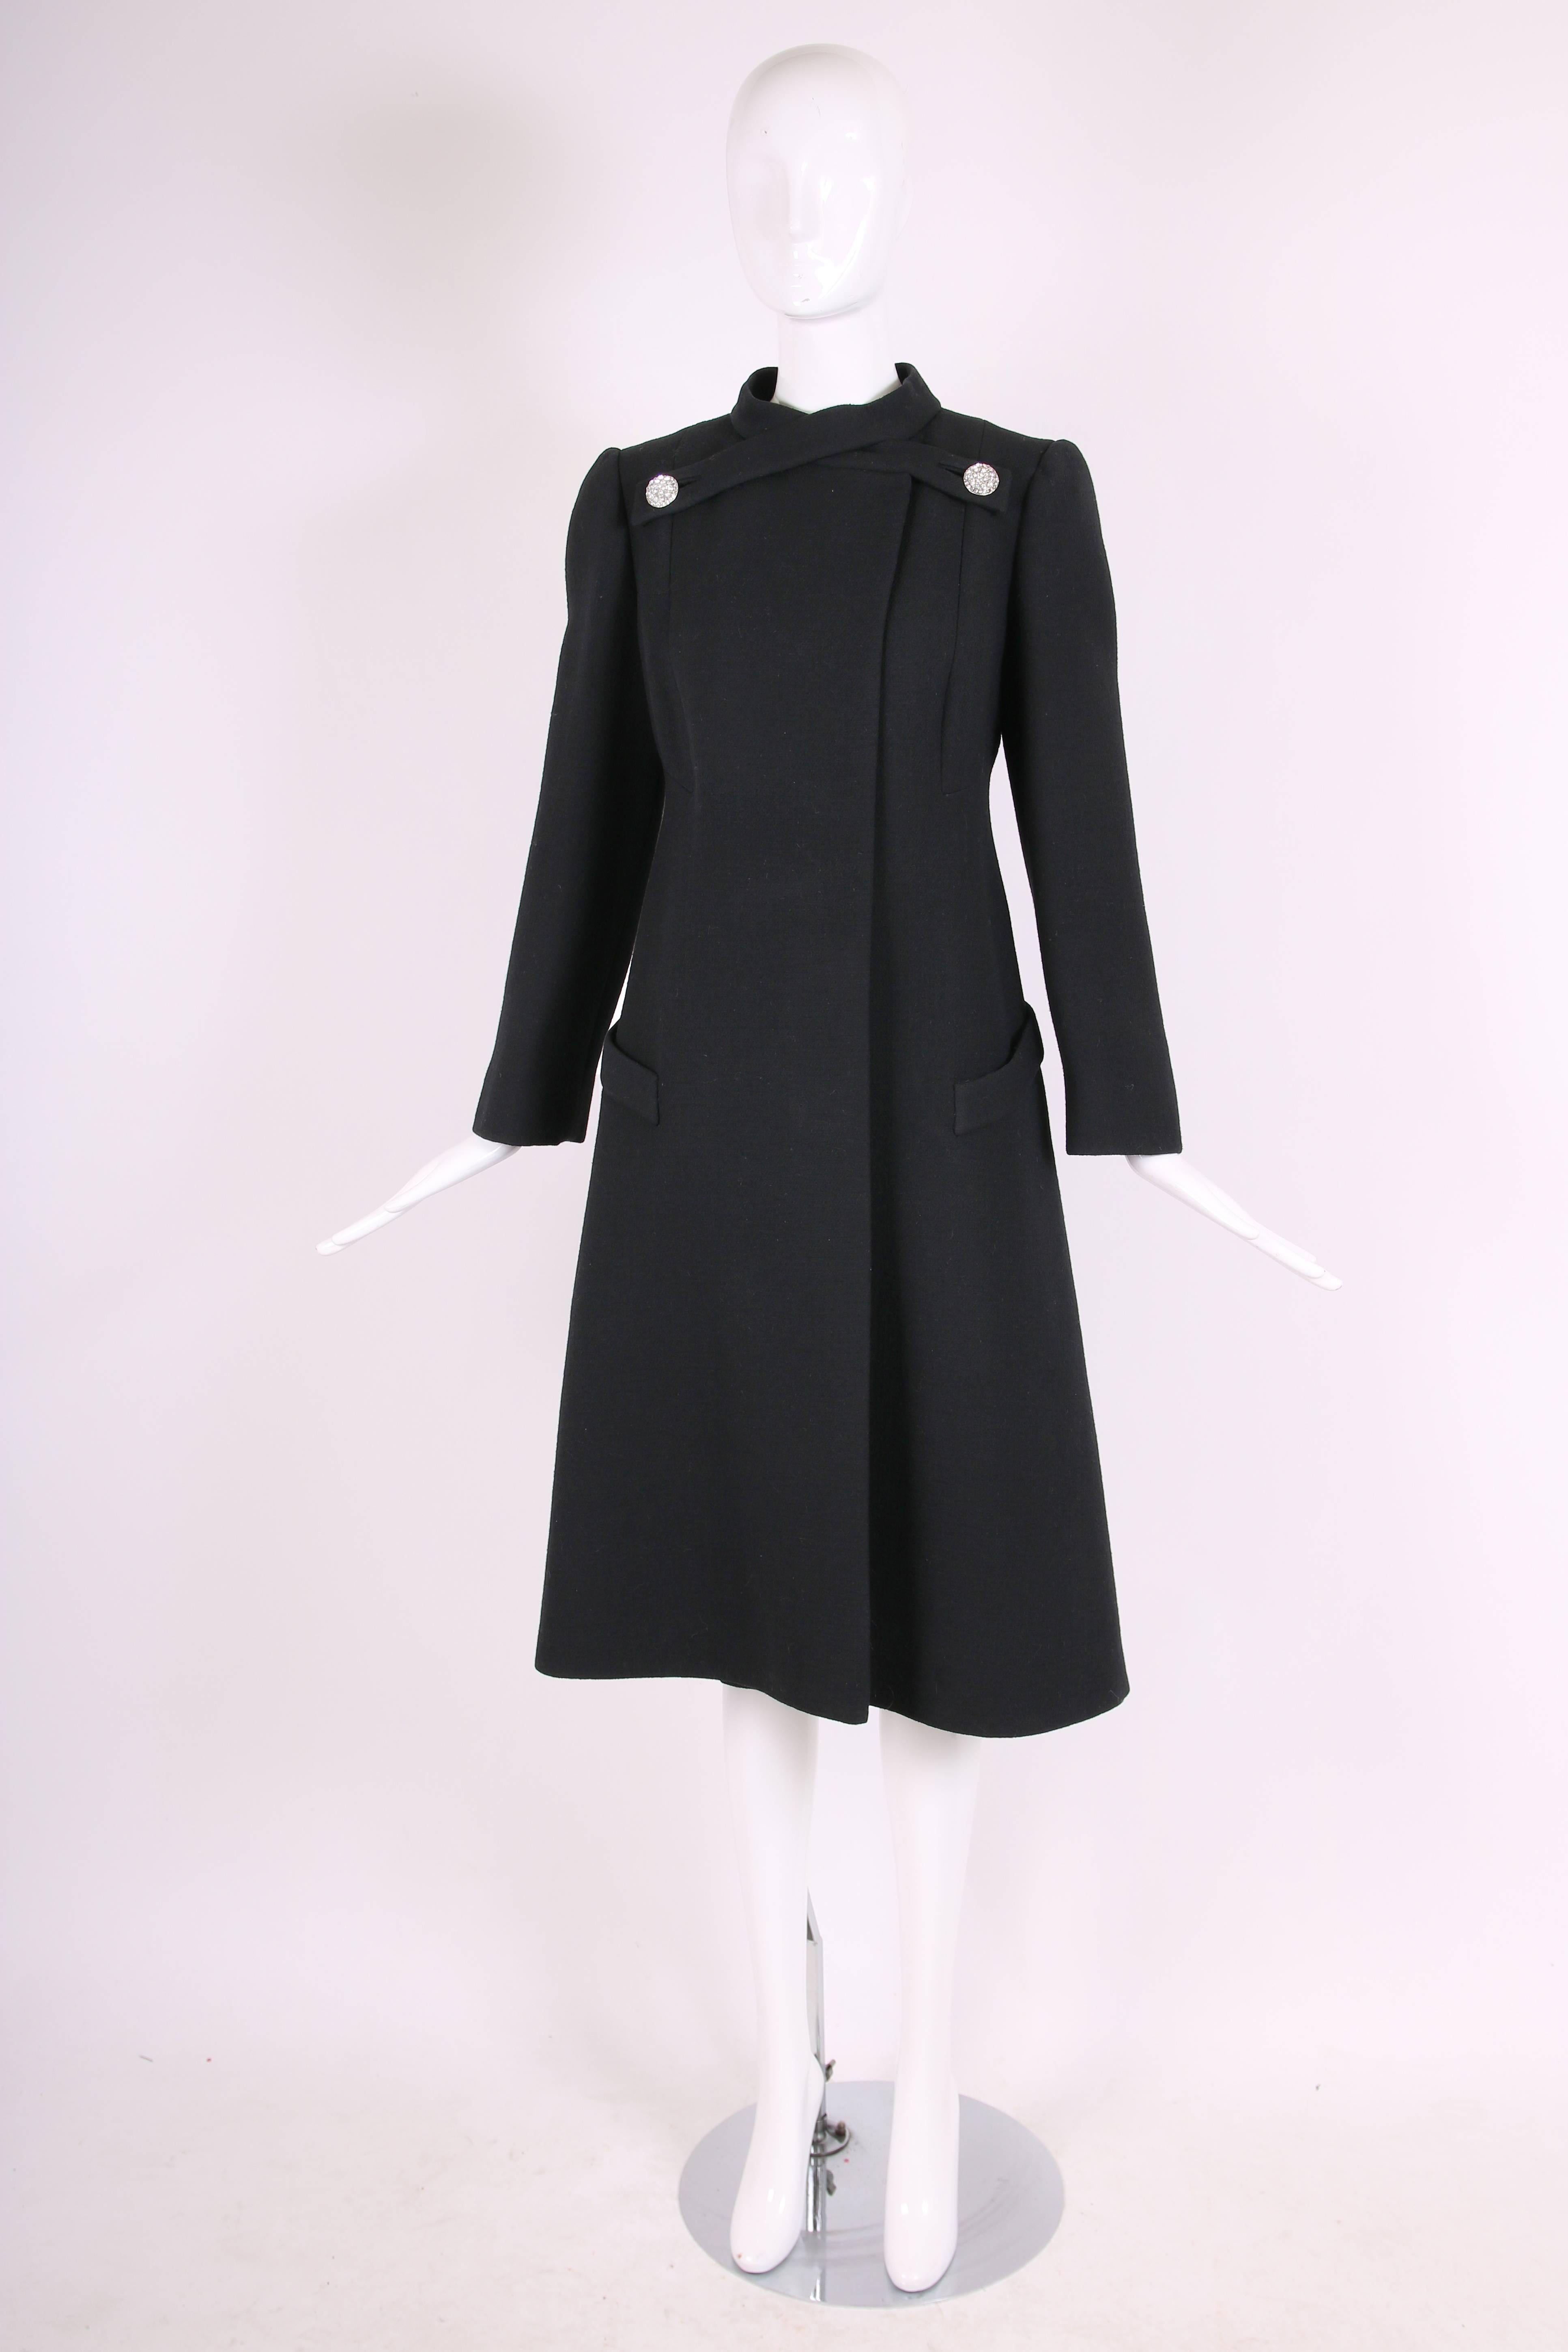 1970's Pauline Trigere Black Wool Coat w/Rhinestone Buttons In Excellent Condition For Sale In Studio City, CA